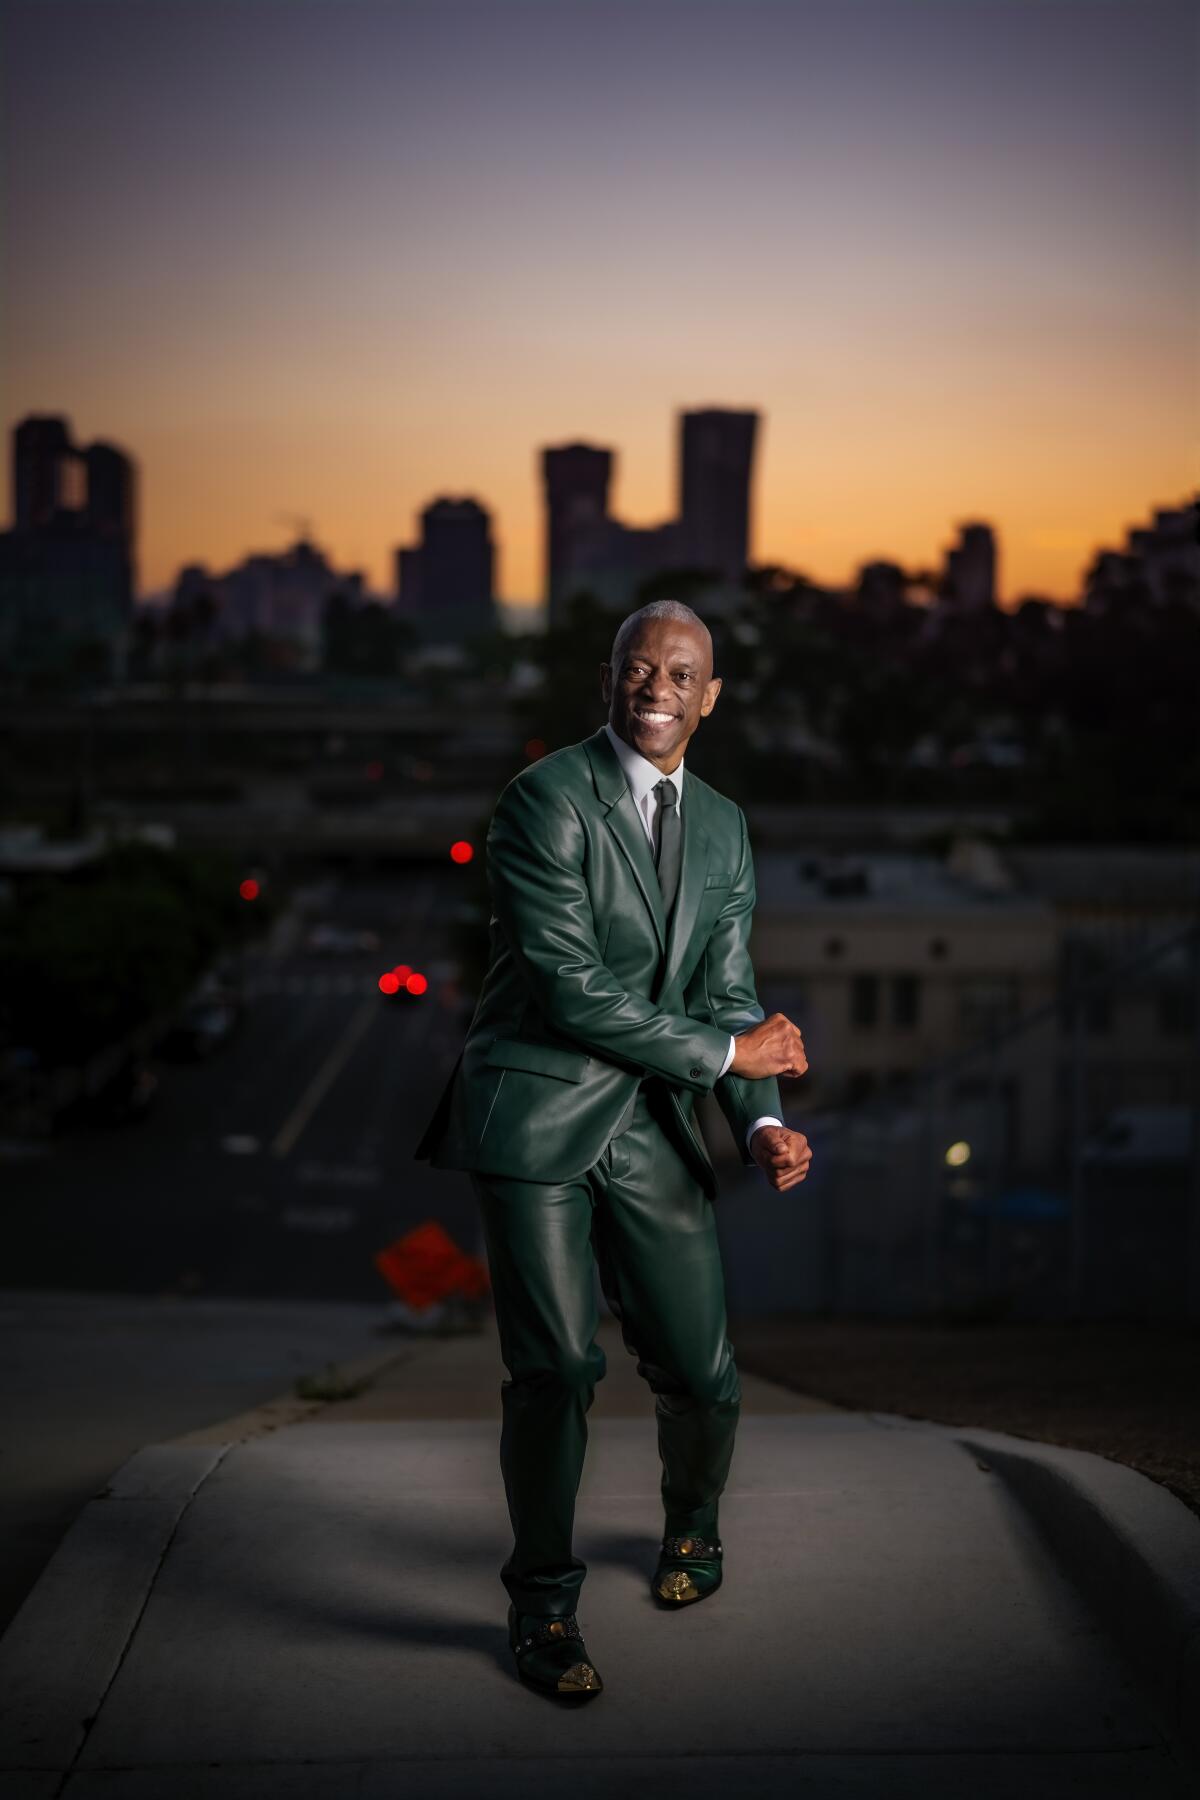 San Diego soul singer Earl Thomas photographed in front of the San Diego skyline at sunset.